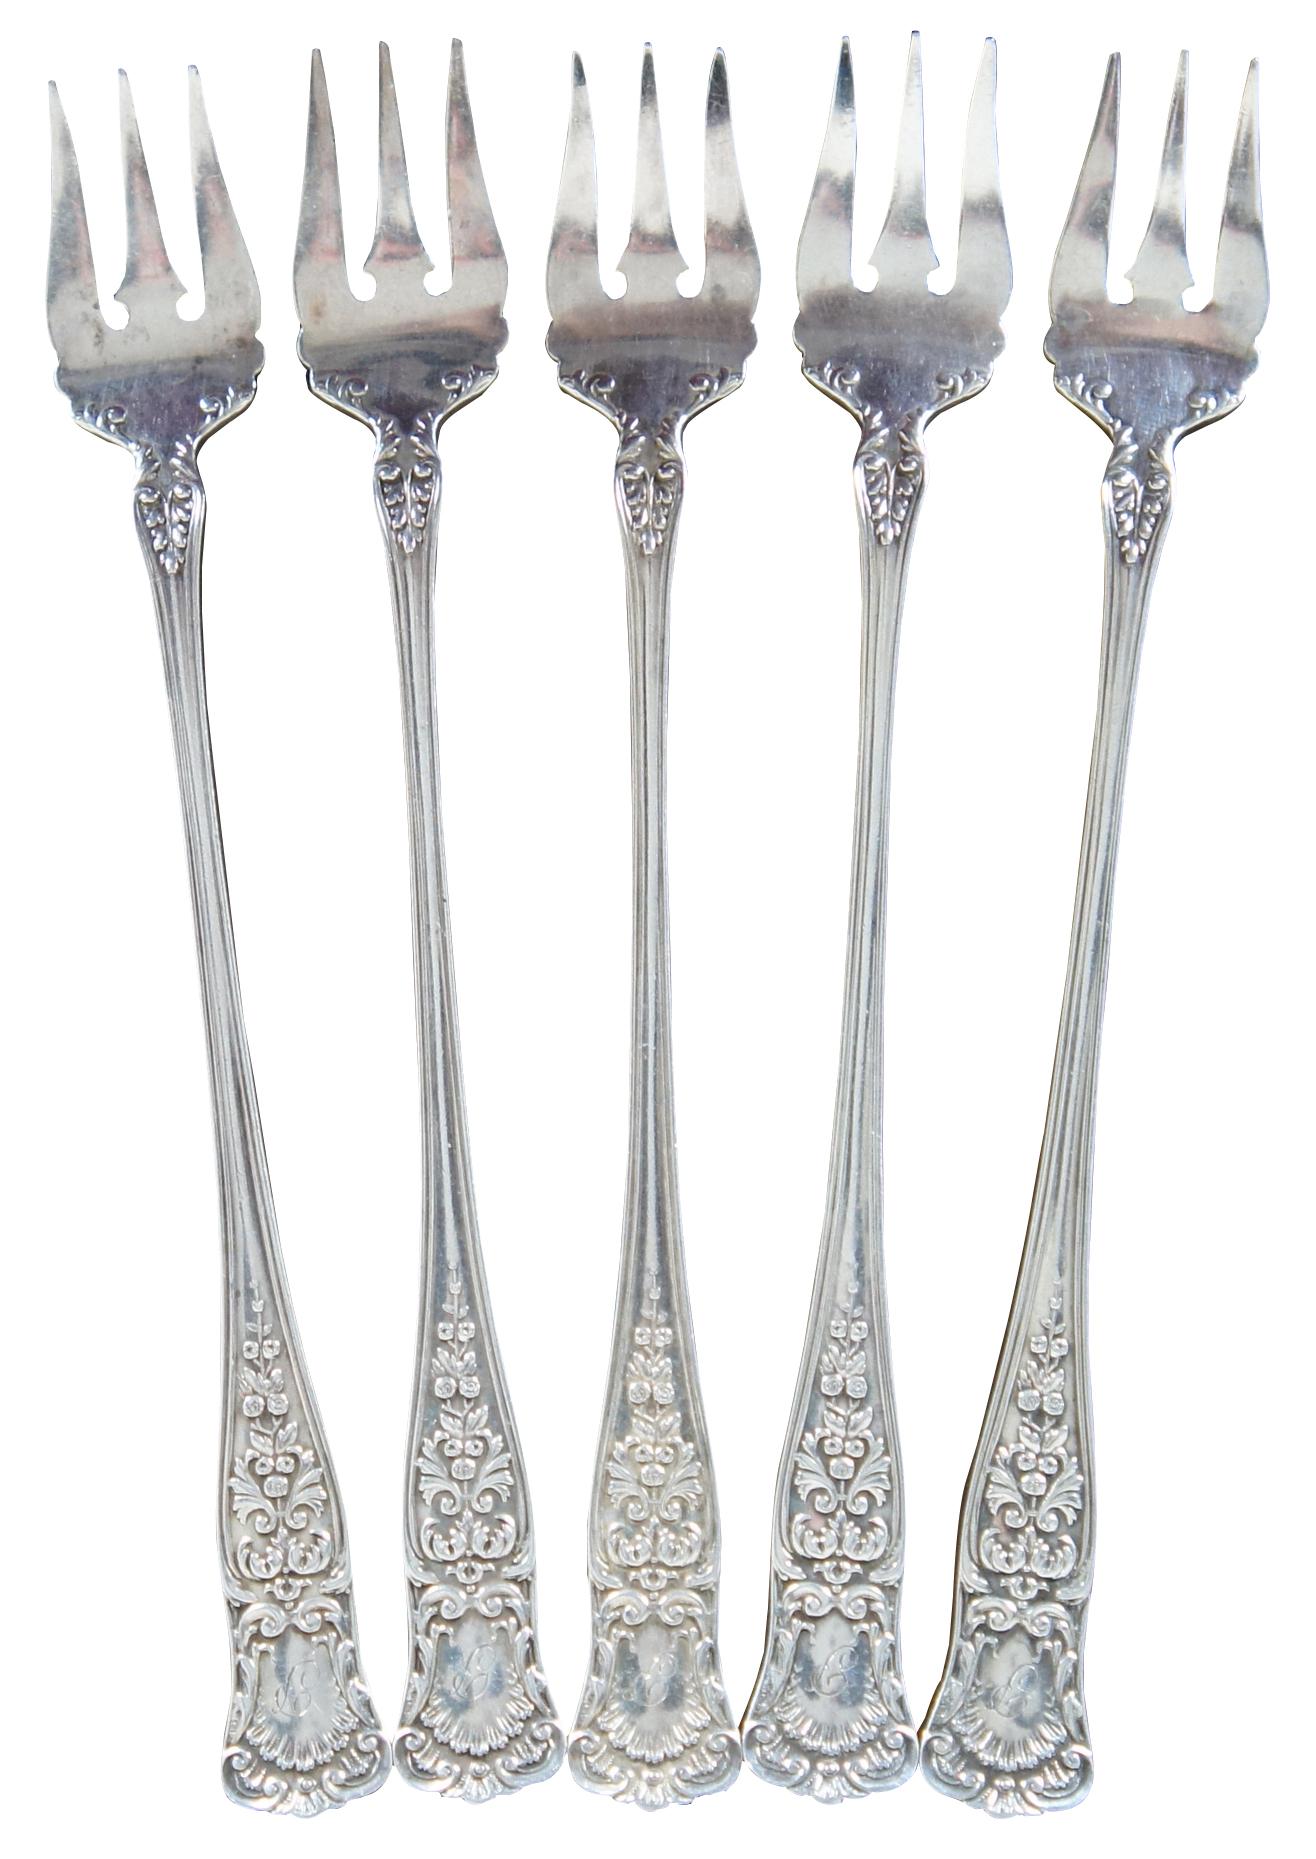 Set of 5 antique Gorham sterling silver cocktail or fish forks with floral and scallop shell pattern, engraved with a monogram “P.”

Measures: 3.625” x 5.25” / 11 g (length x width/weight).